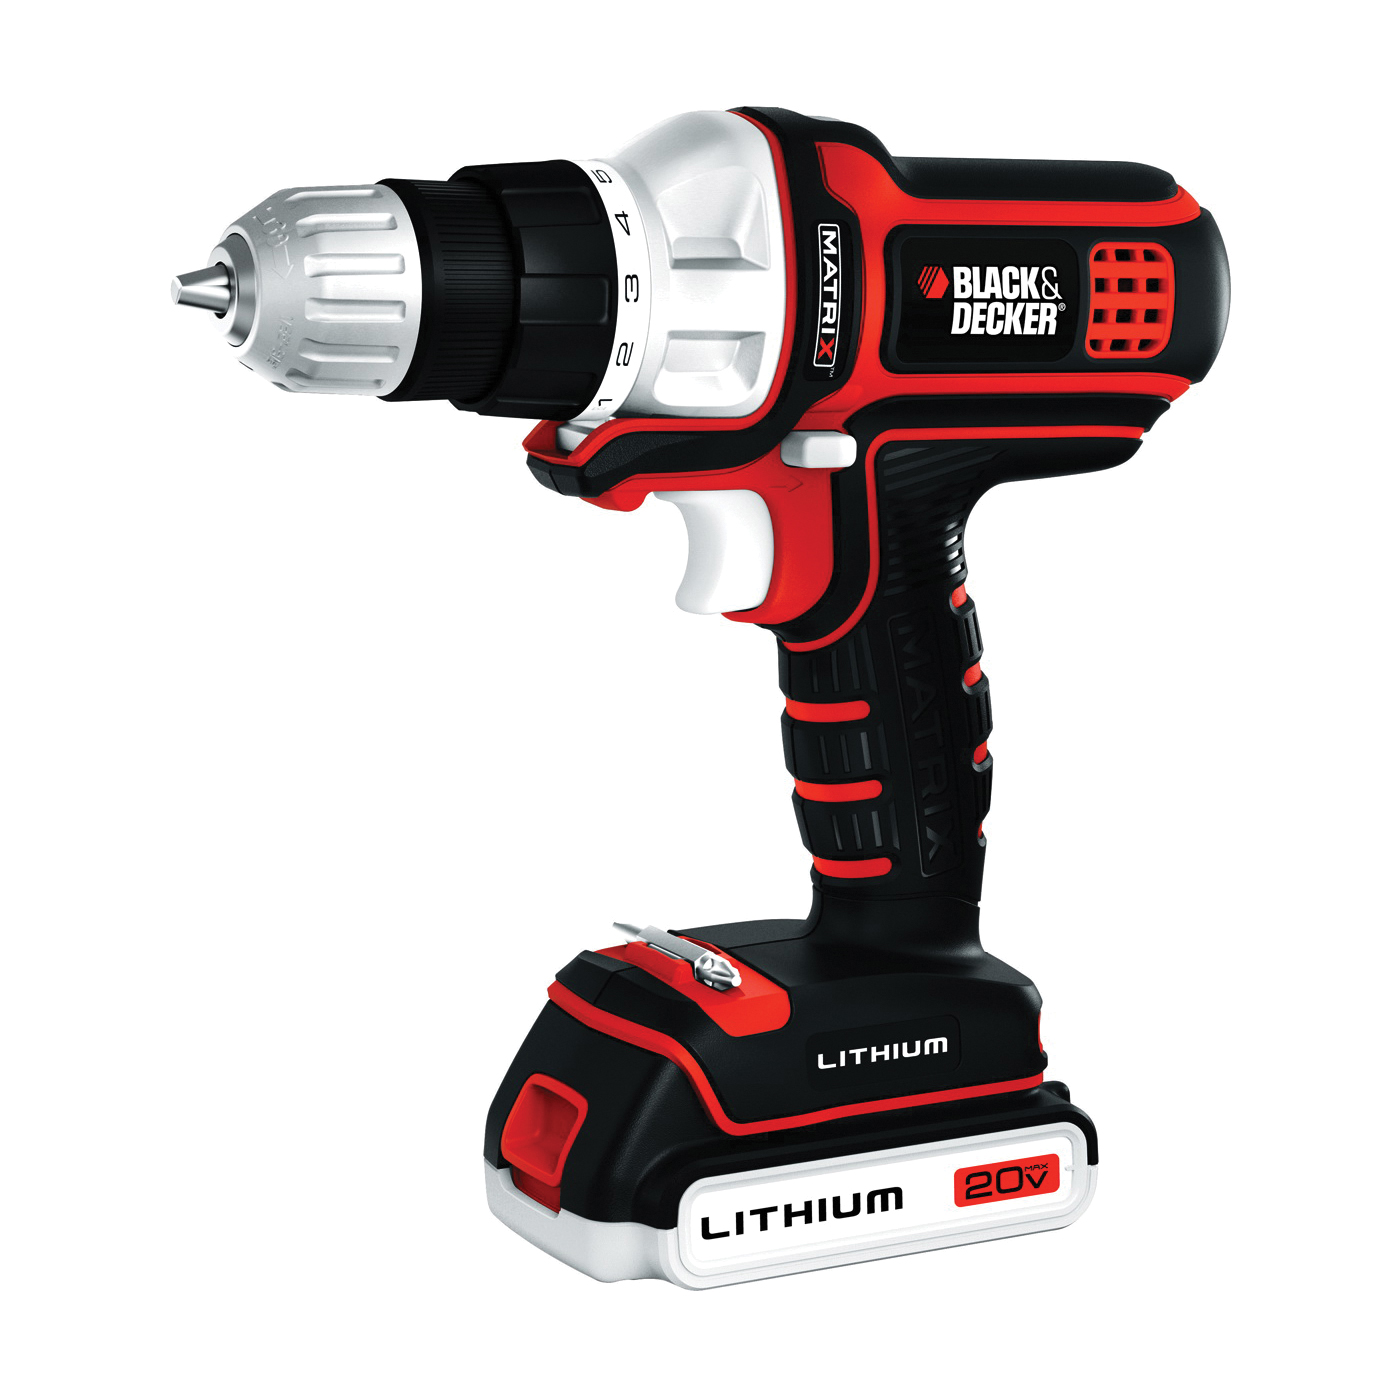 BDCDMT120C Drill/Driver, Battery Included, 20 V, 3/8 in Chuck, Keyless Chuck